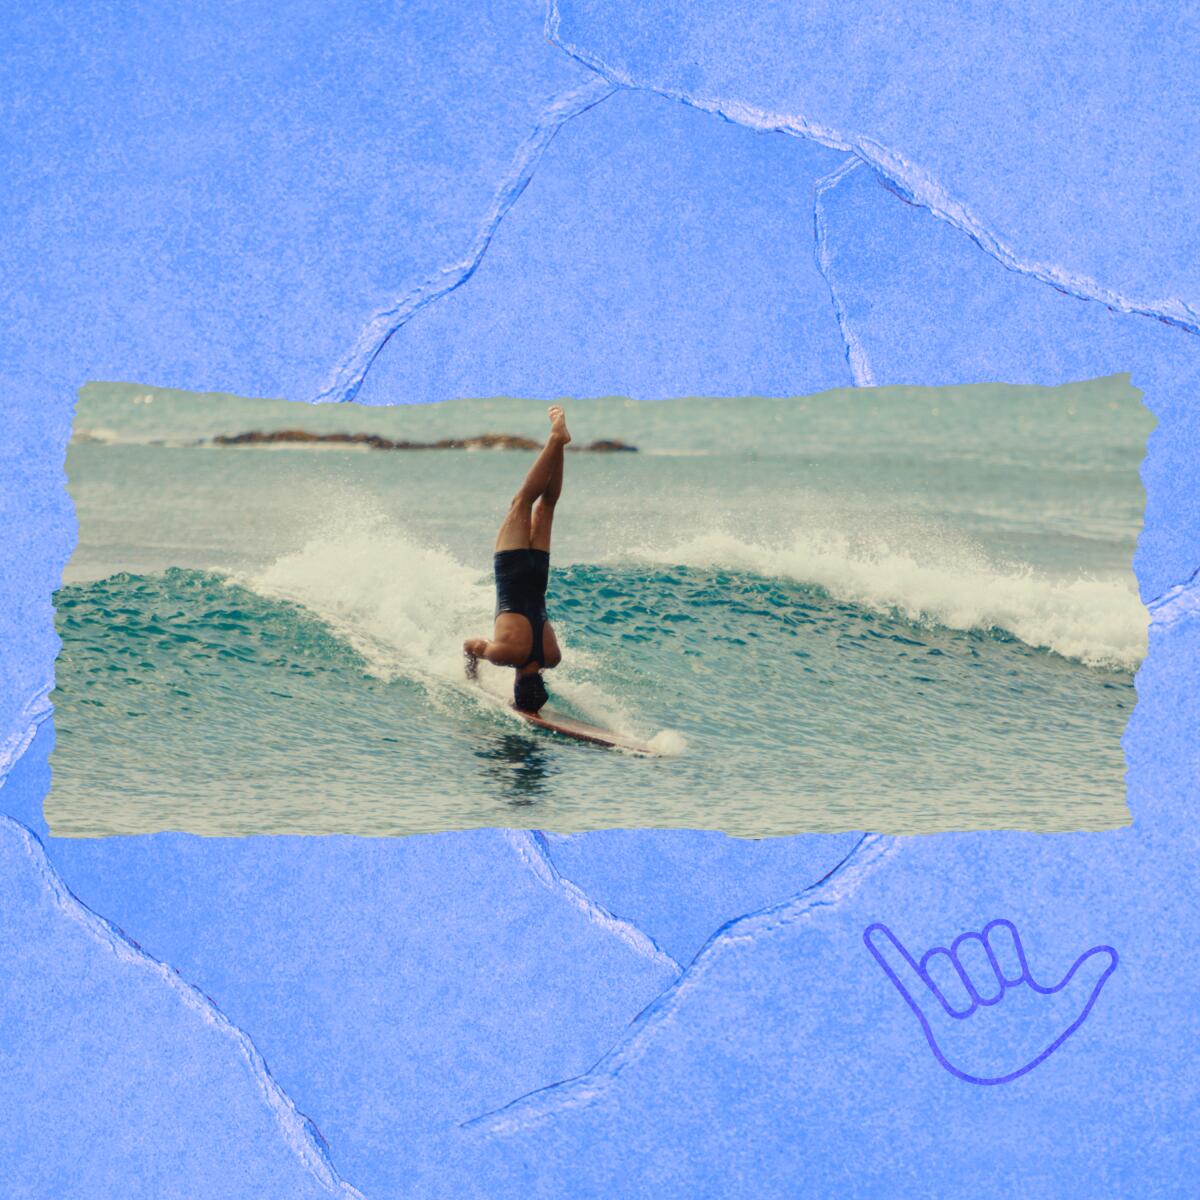 A man rides a wave in the ocean on a surfboard while doing a handstand.